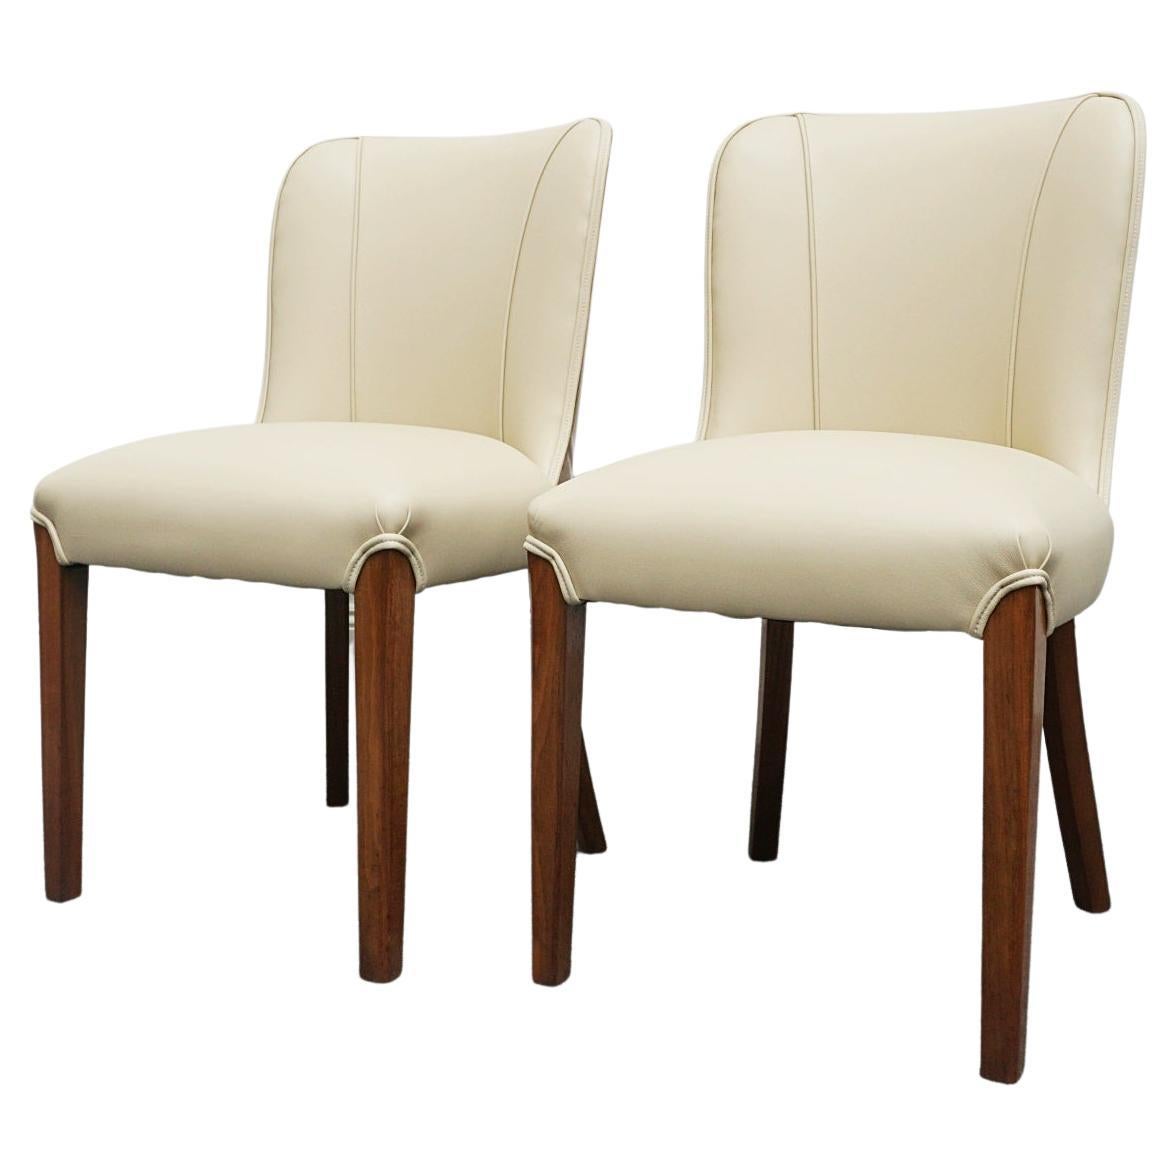 Pair of Art Deco Burr Walnut and Cream Leather Side Chairs circa 1930